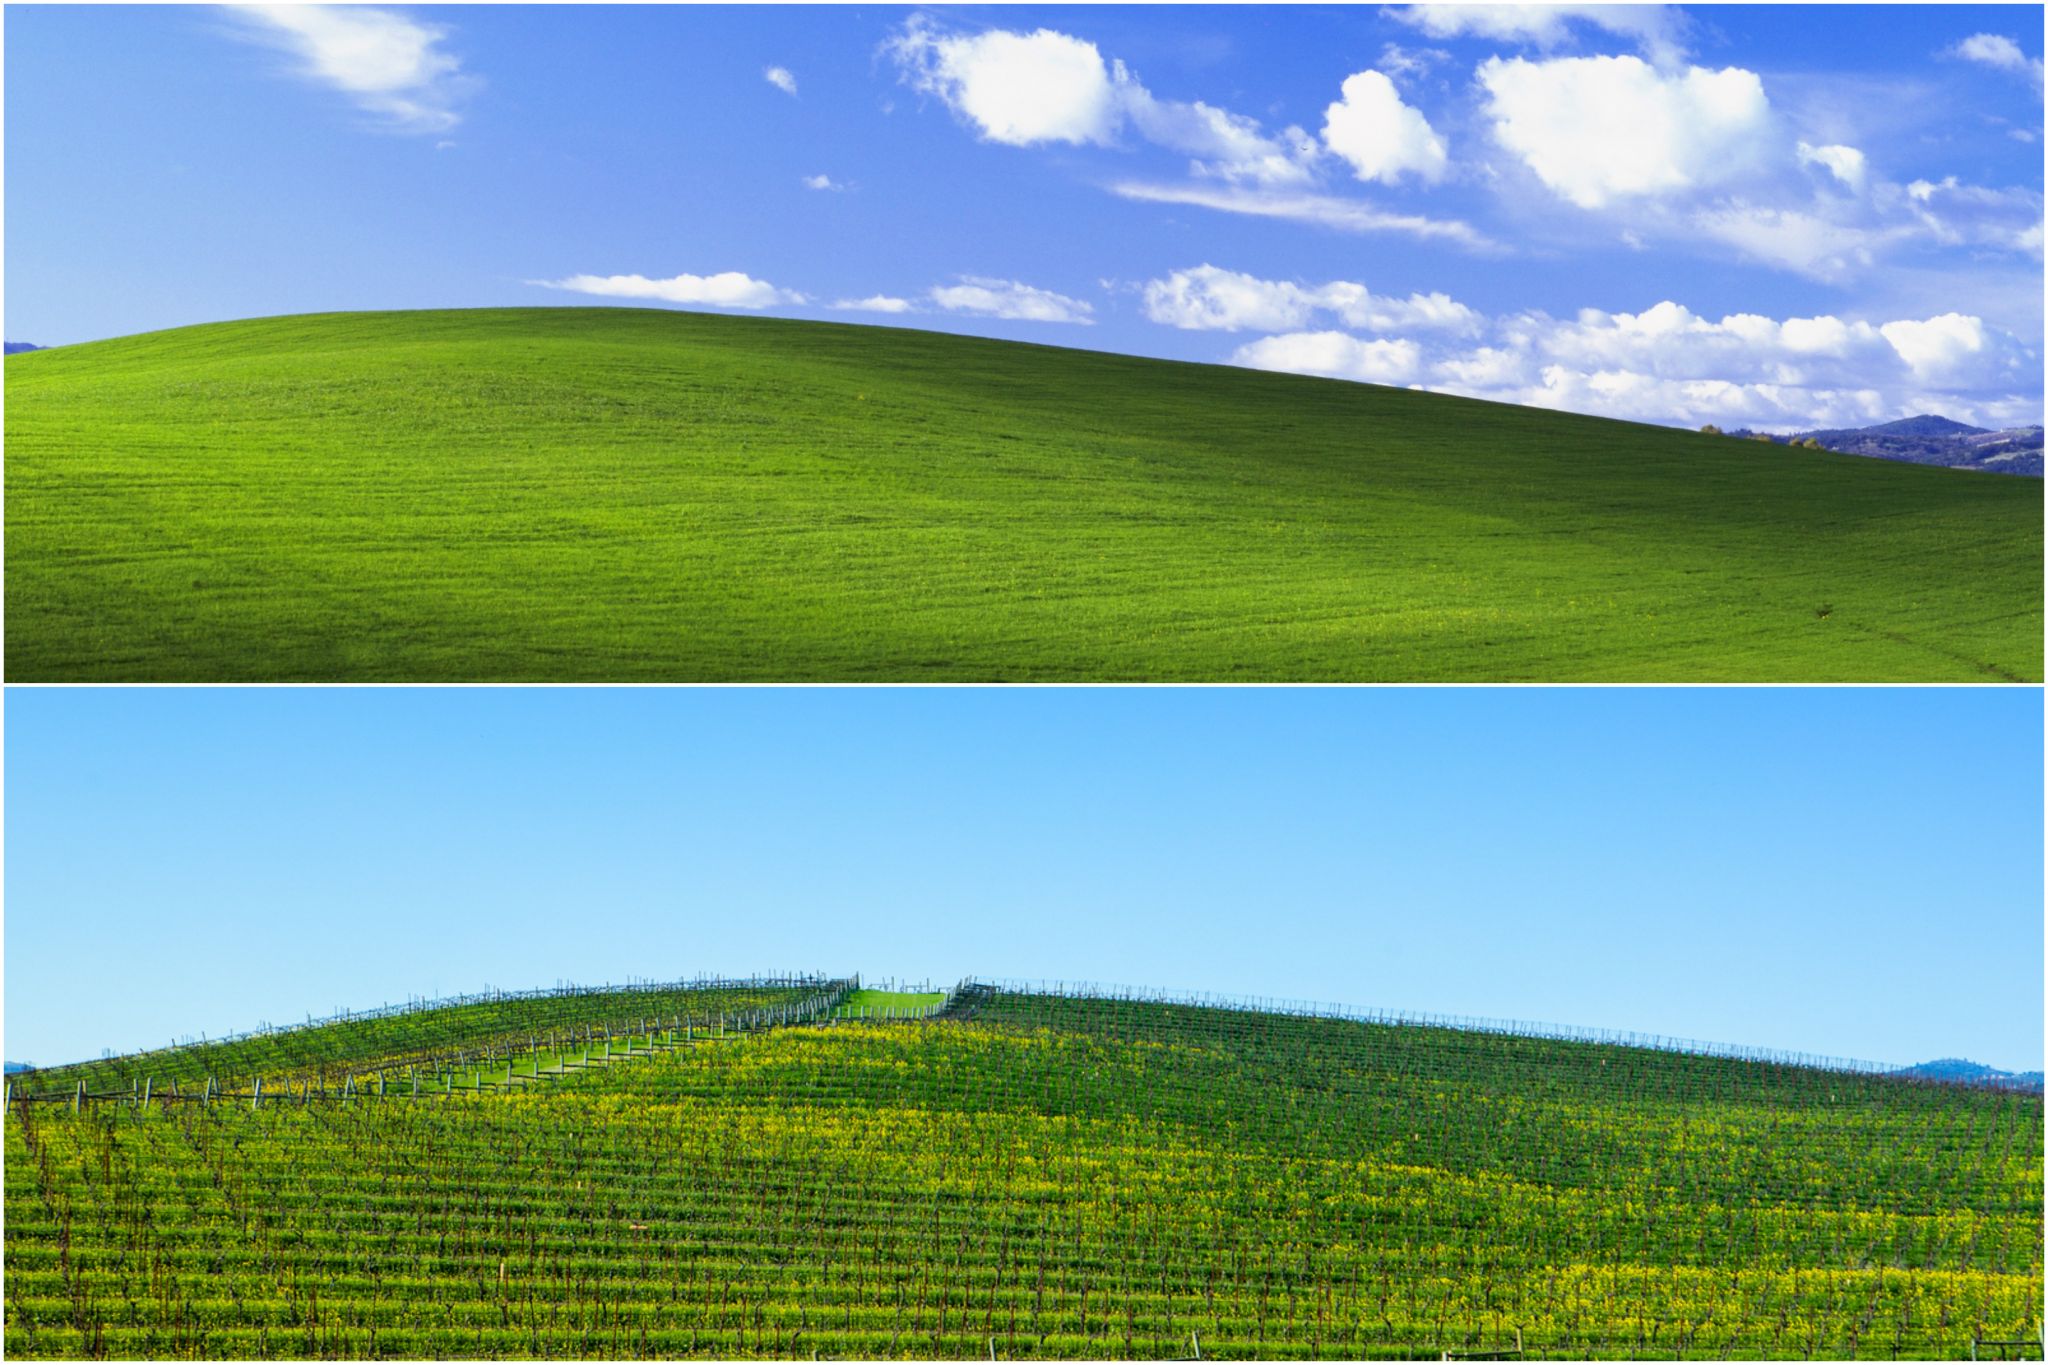 I found the Bay Area hill in Windows XP s iconic wallpaper. 